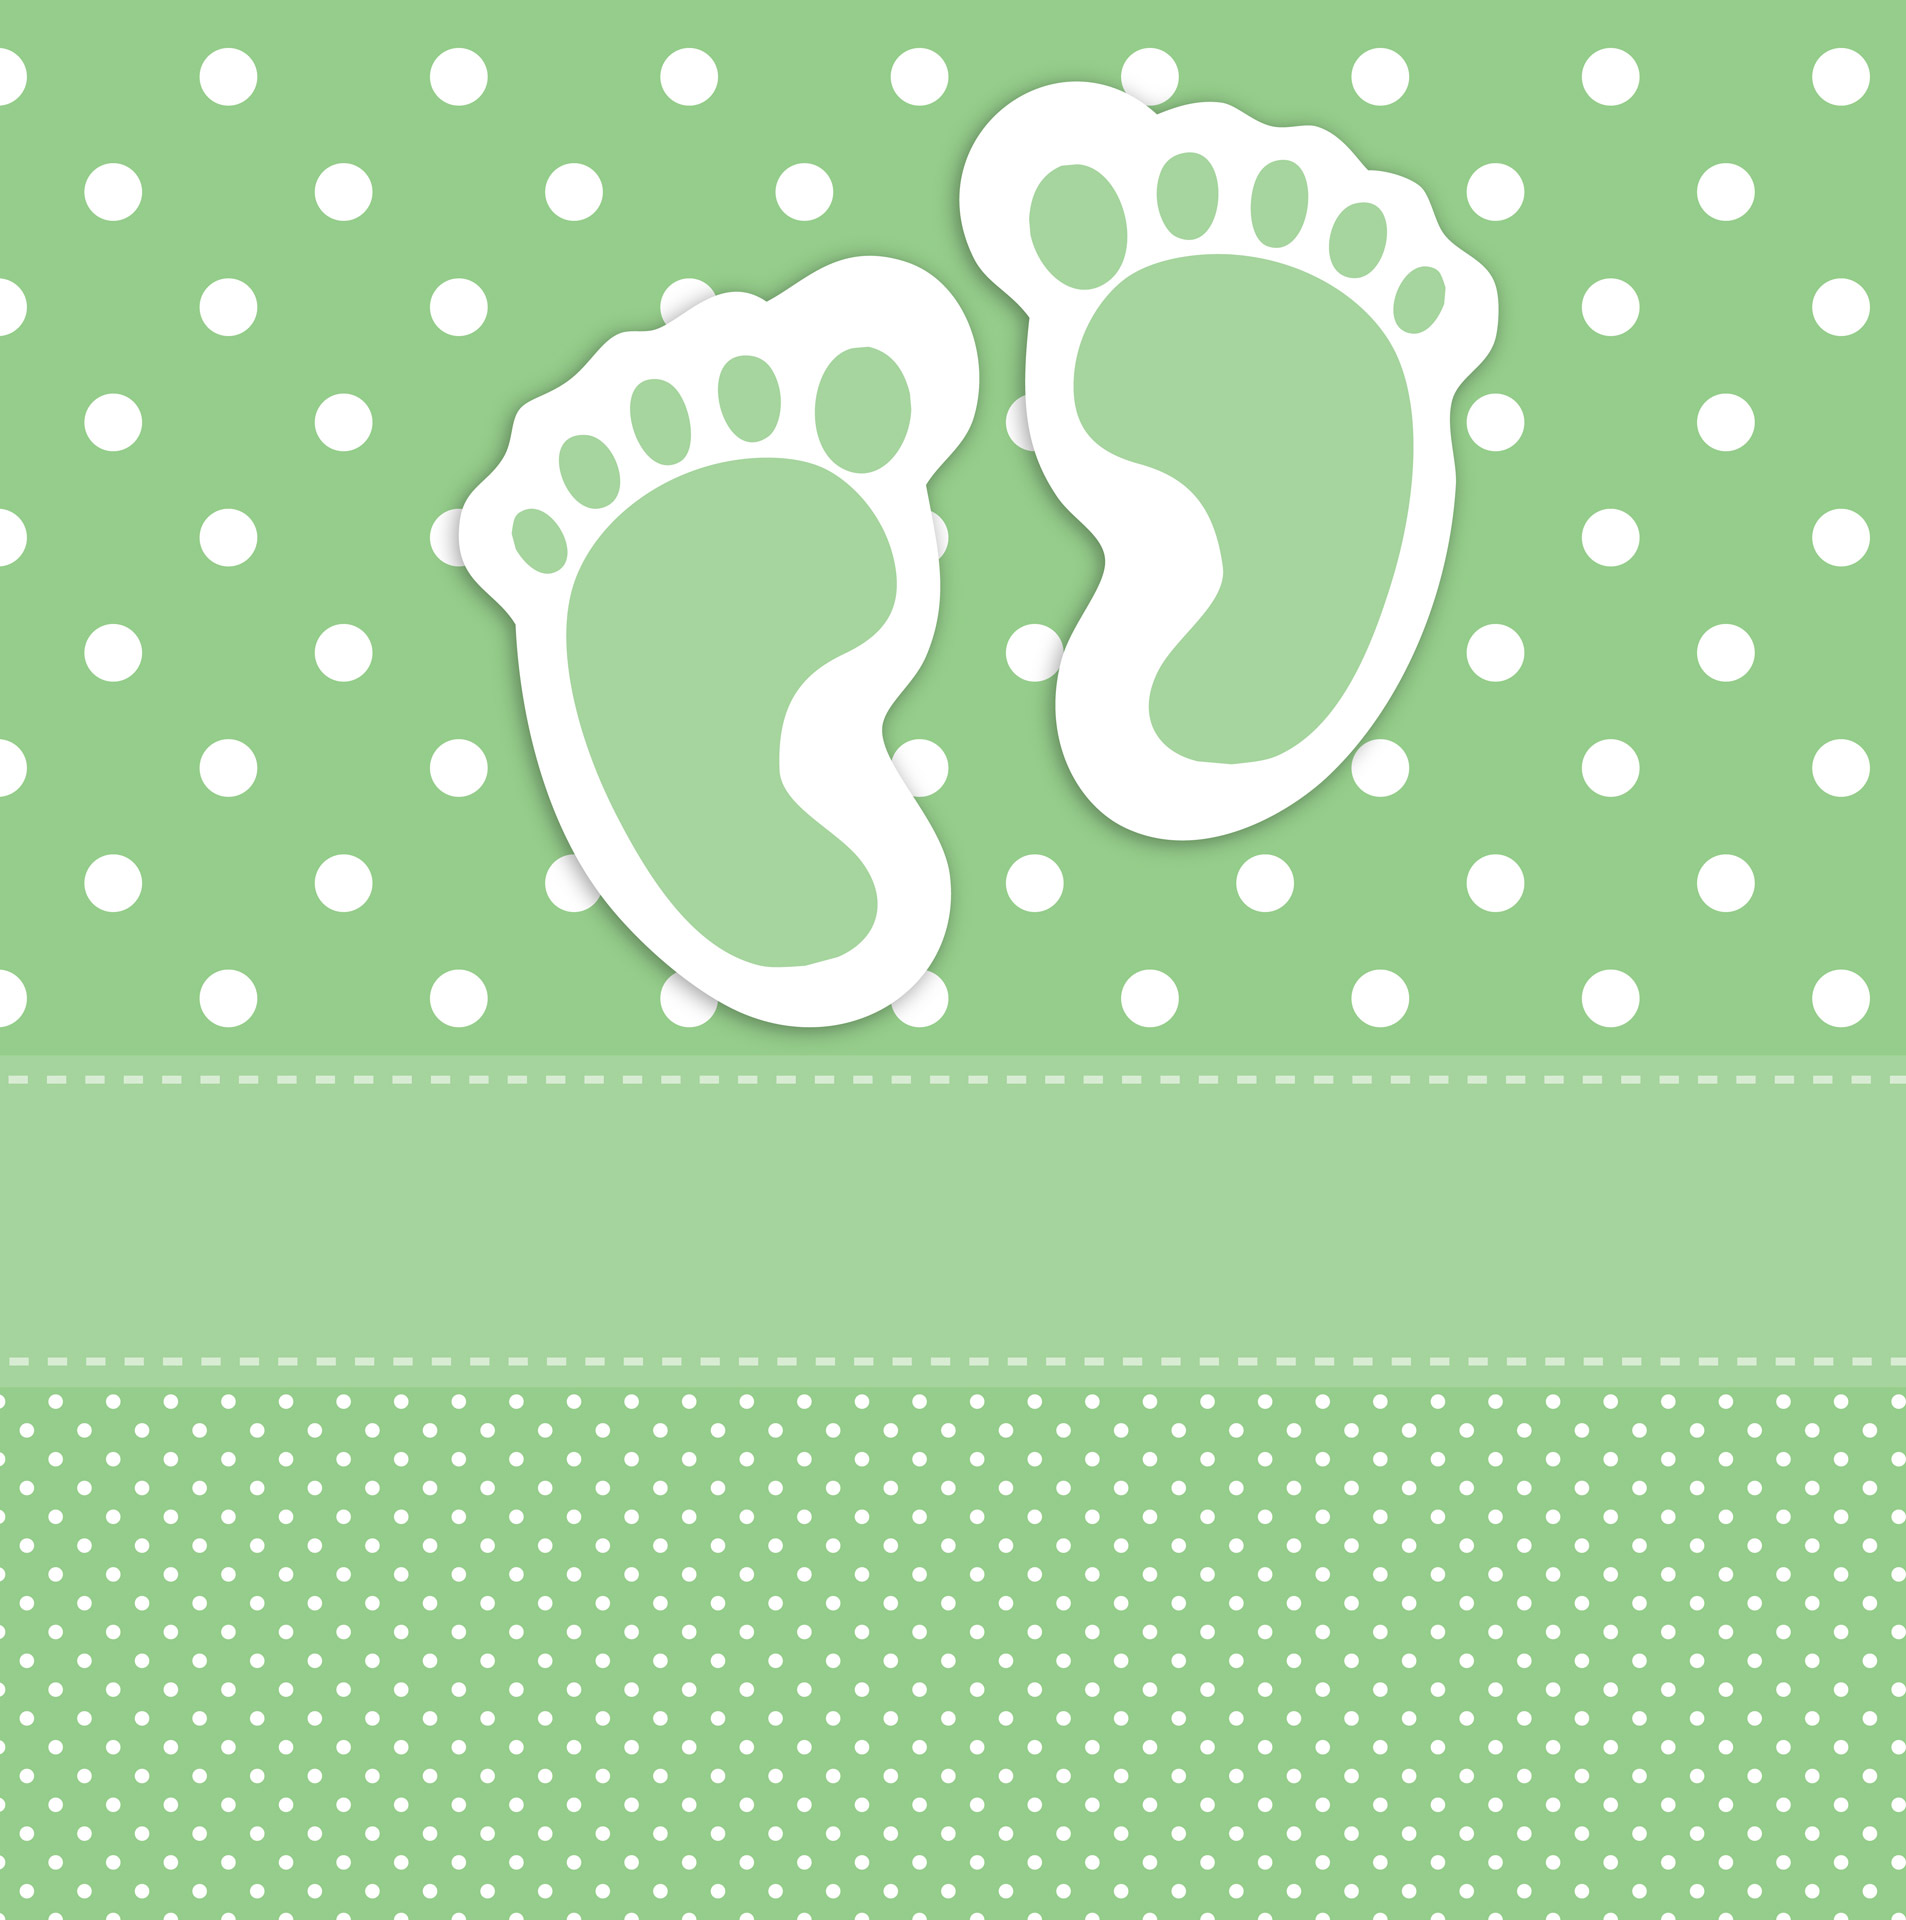 baby-footprints-card-template-free-stock-photo-public-domain-pictures